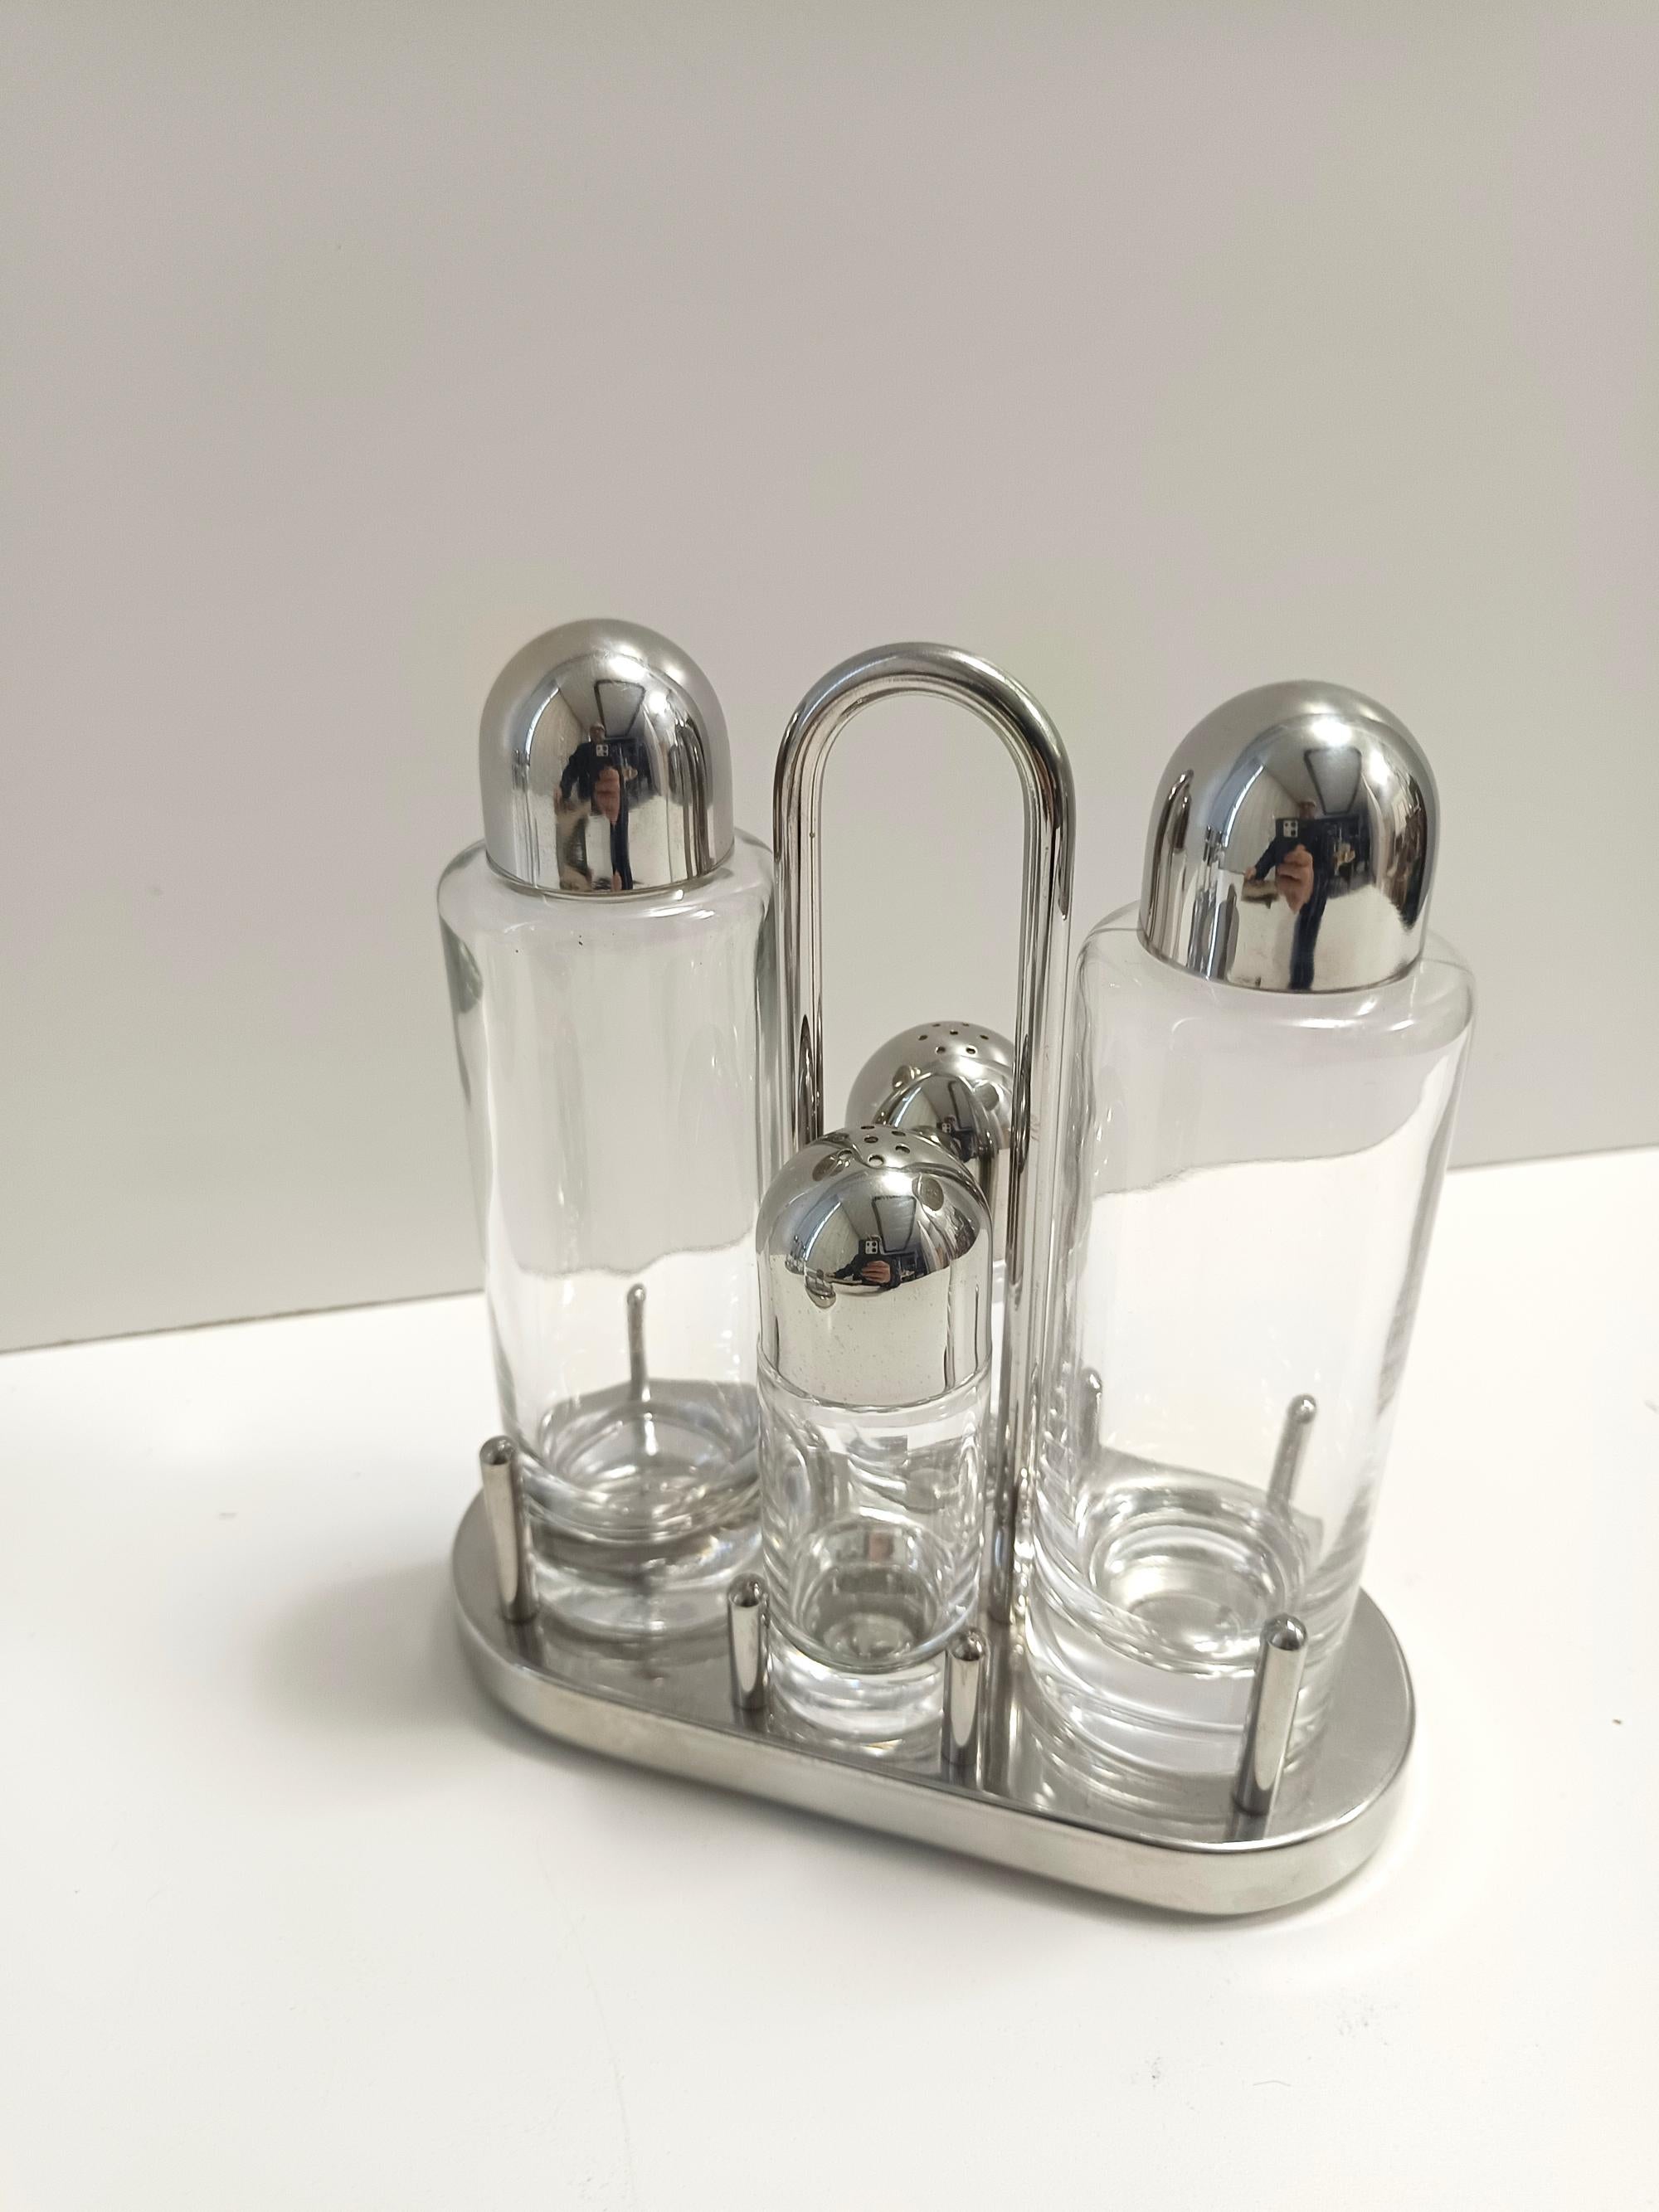 Late 20th Century Steel, Glass and Plastic Cruet Set with Cheese Bowl by E. Sottsass for Alessi For Sale